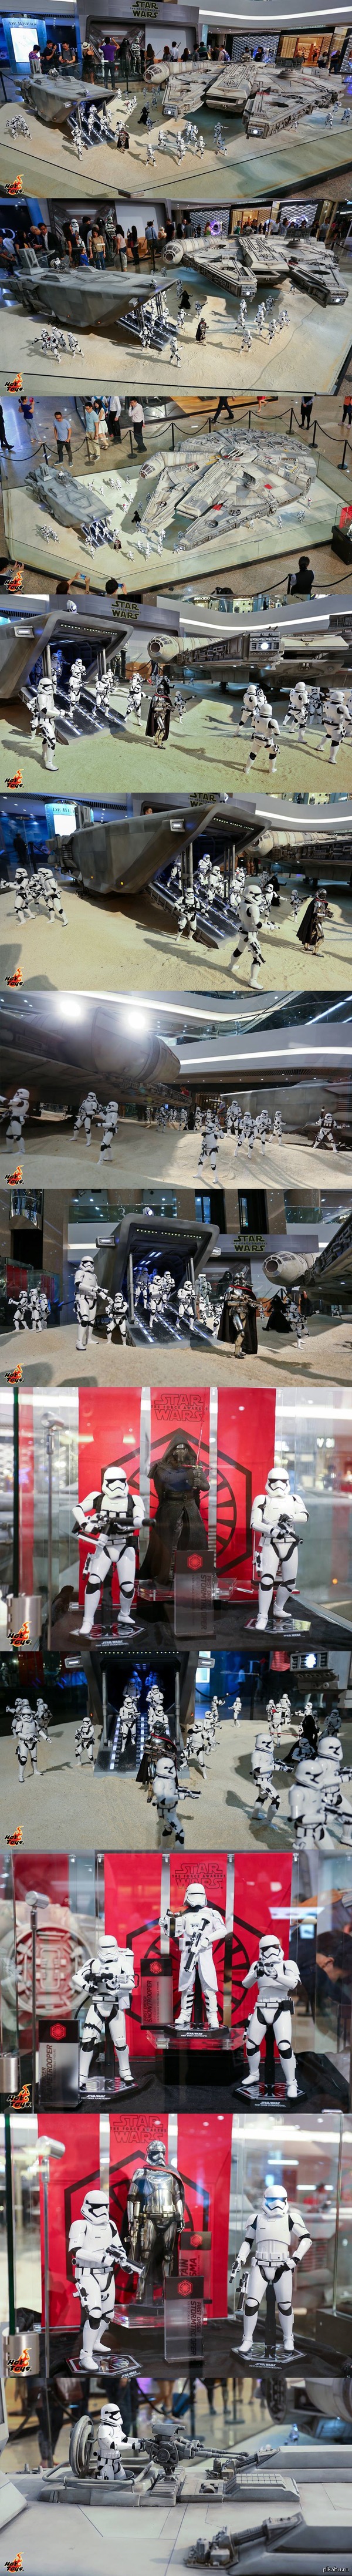    Hot Toys  Times Square (Causeway Bay)   Hot toys -       